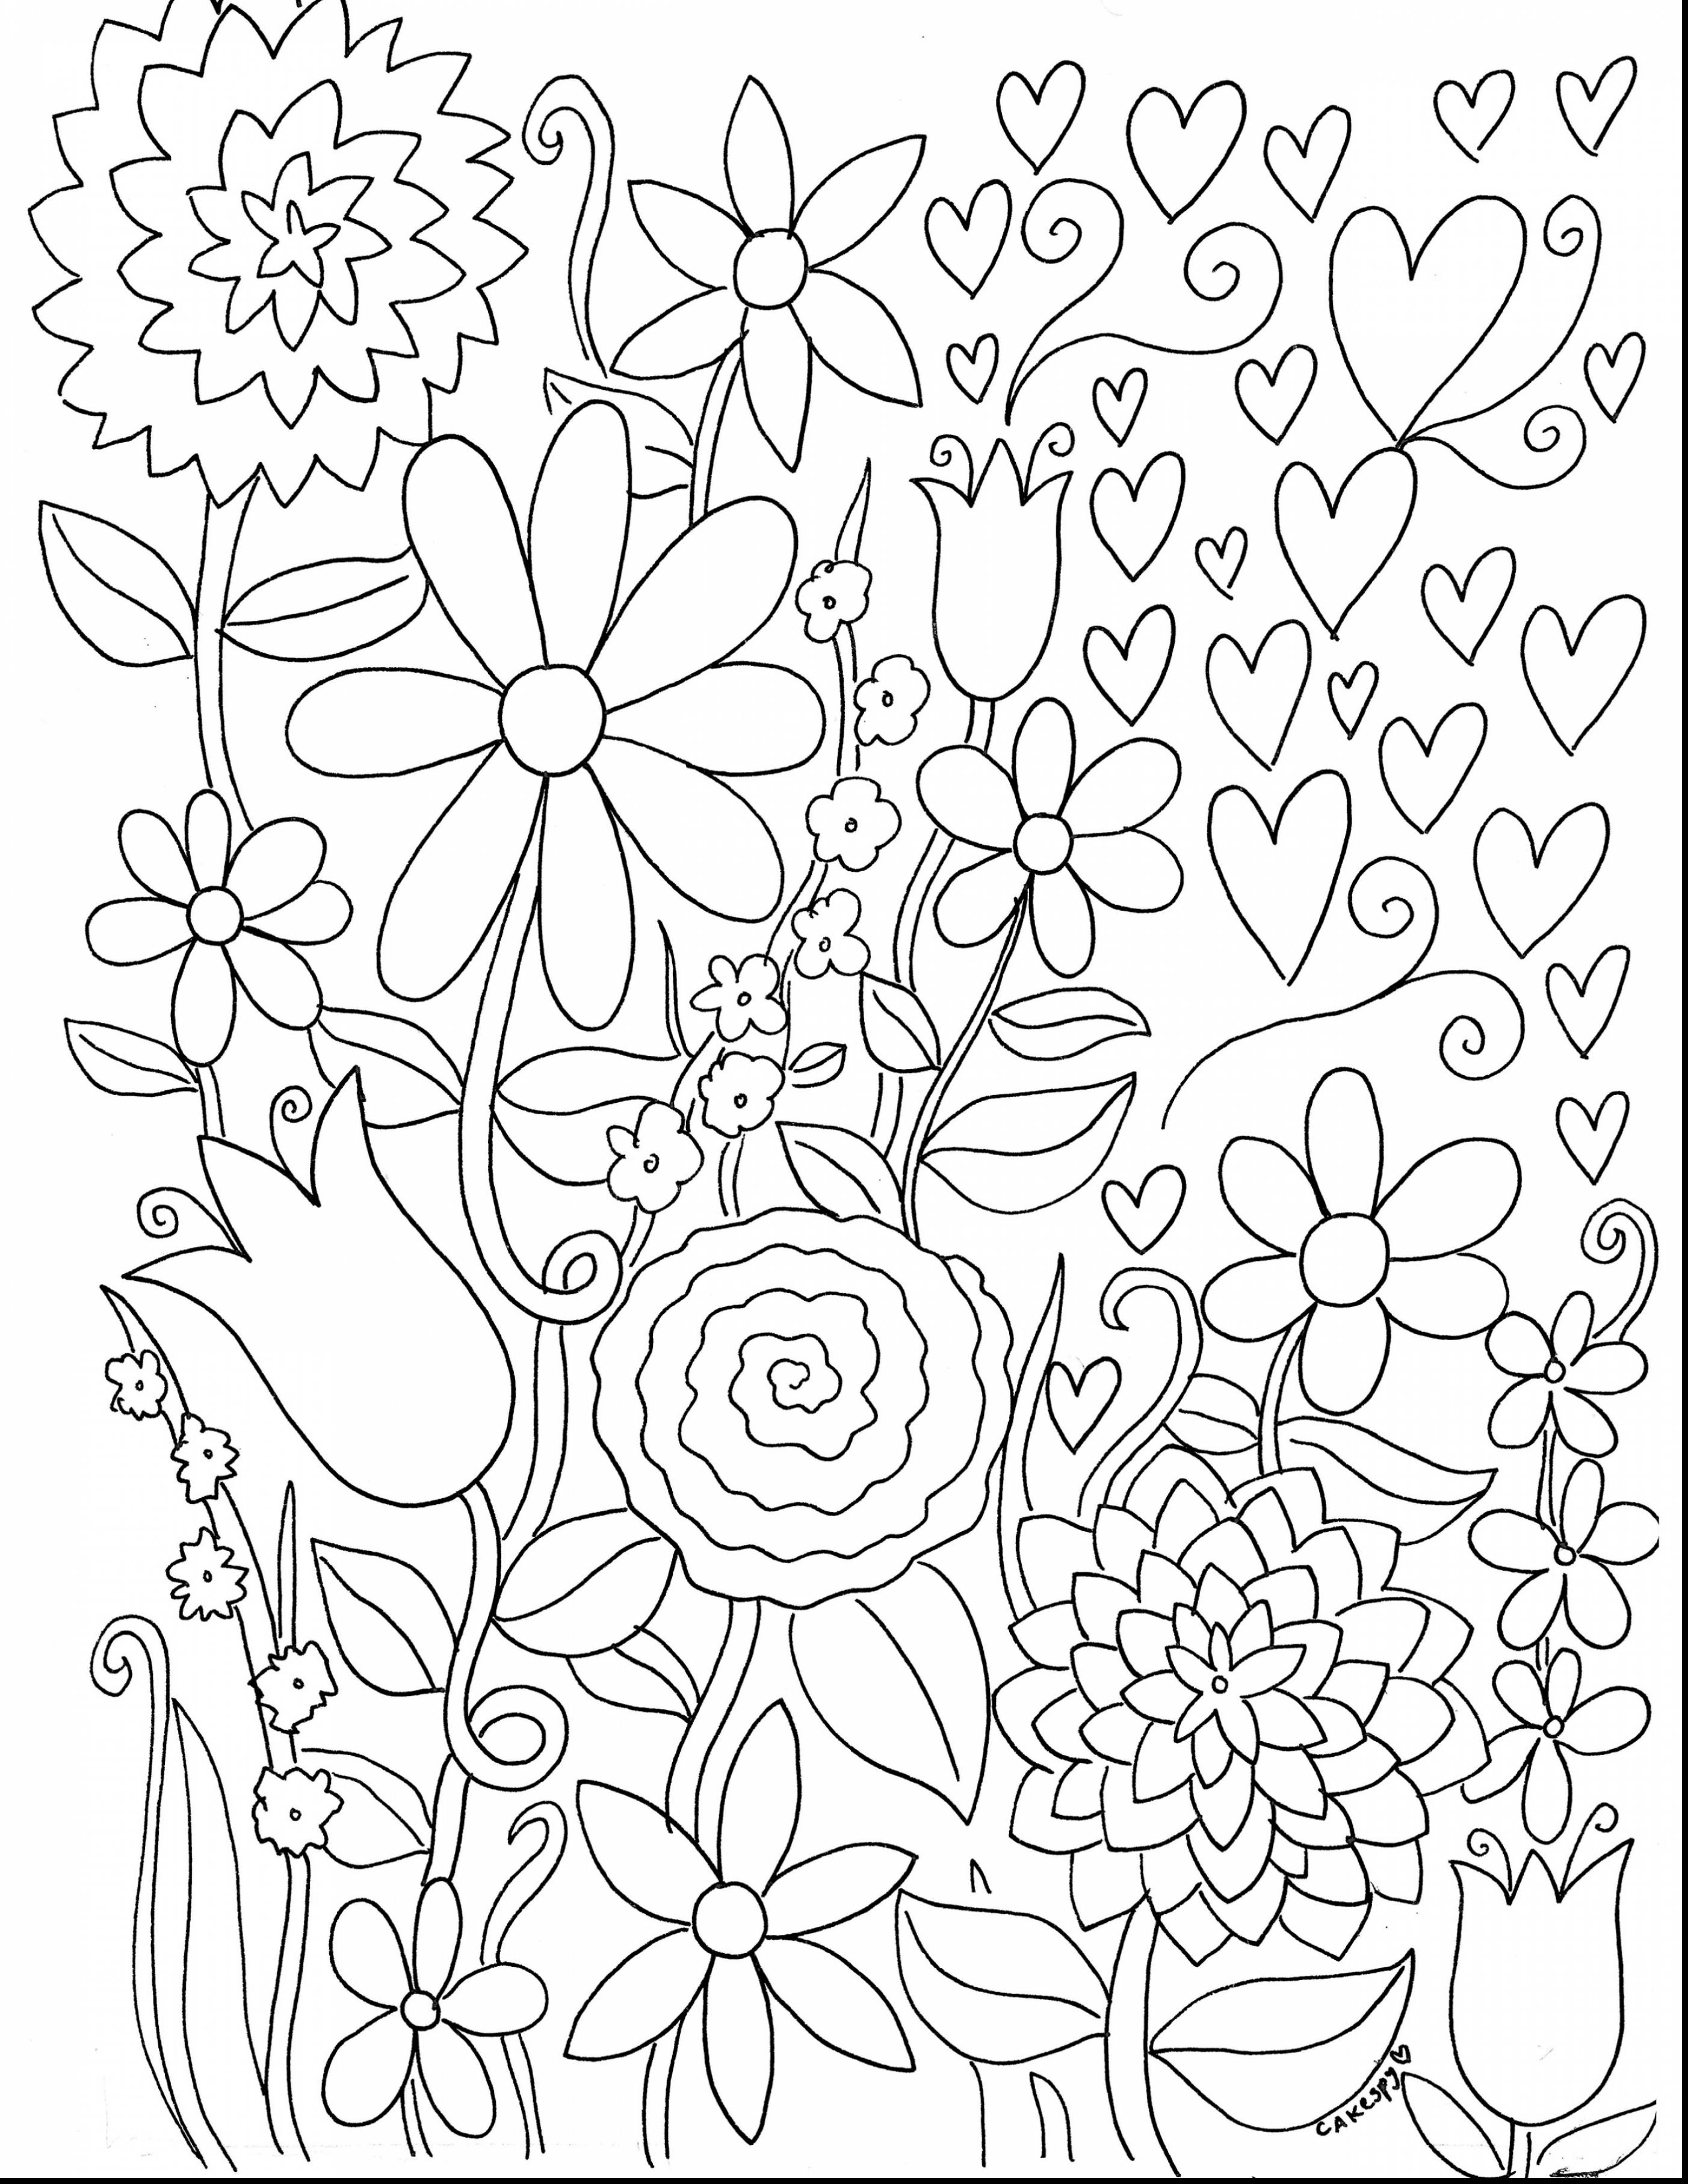 168 Animal Make Your Own Coloring Pages for Kids